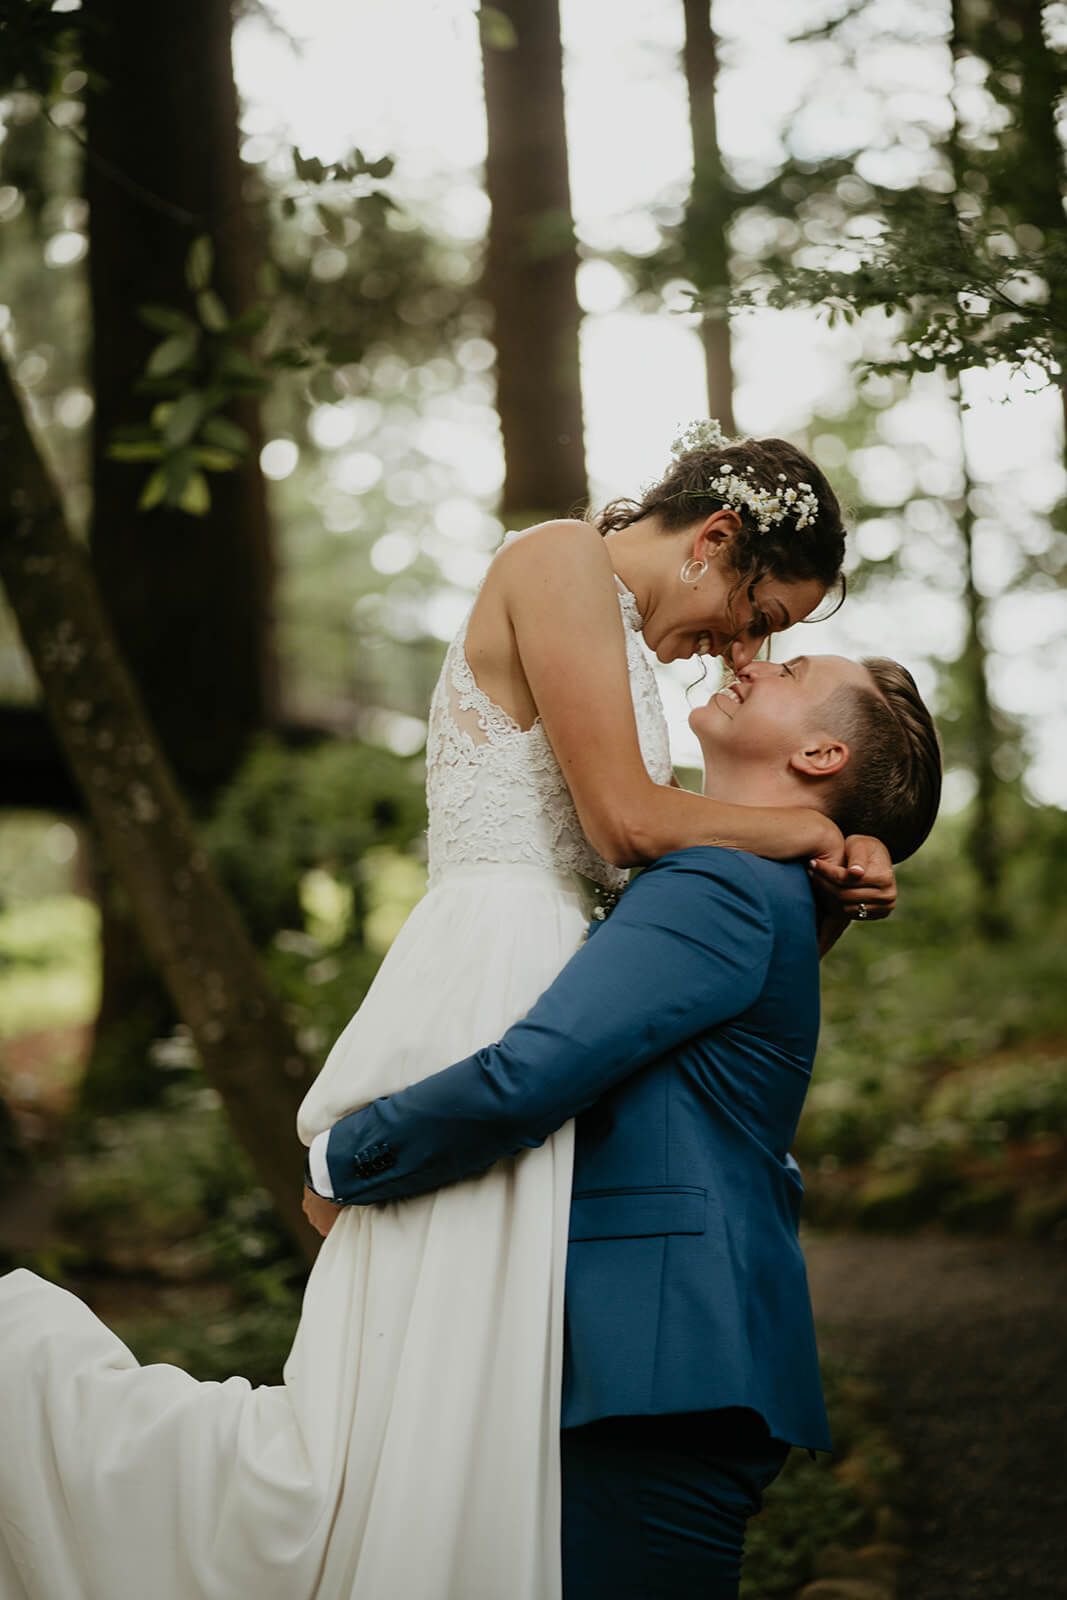 Wedding portraits in the forest with two brides